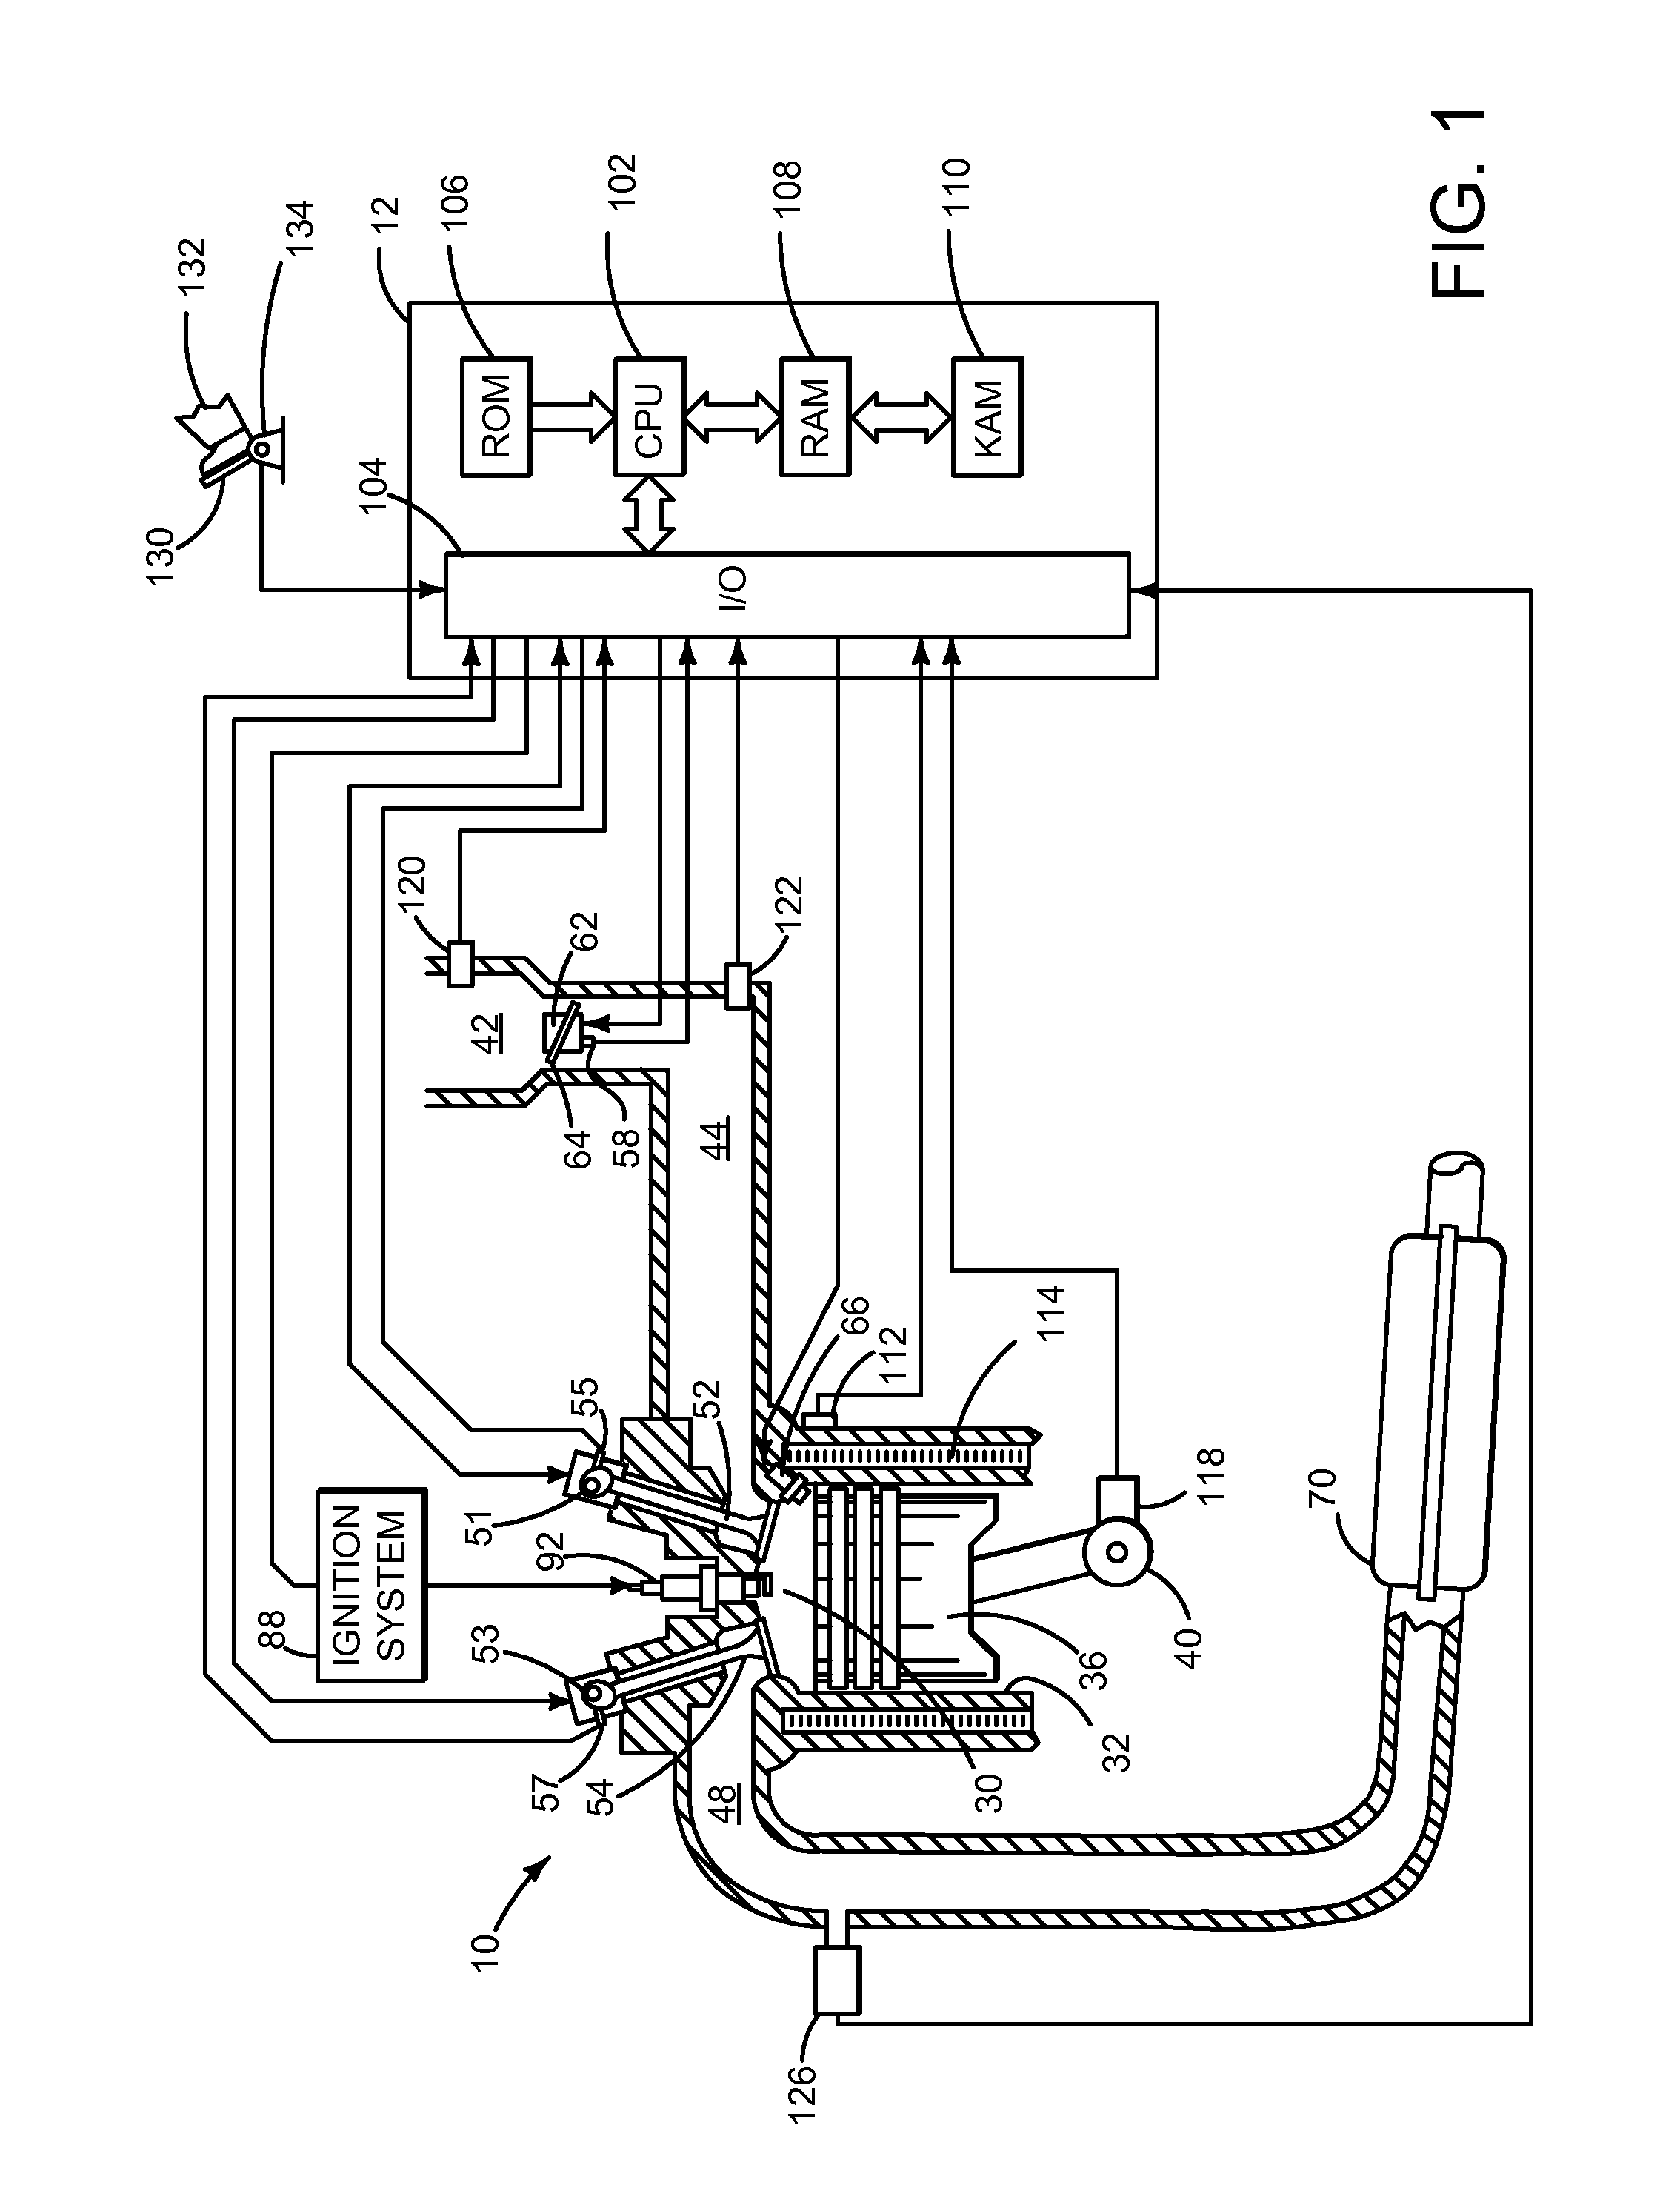 System and method for operating an ignition system